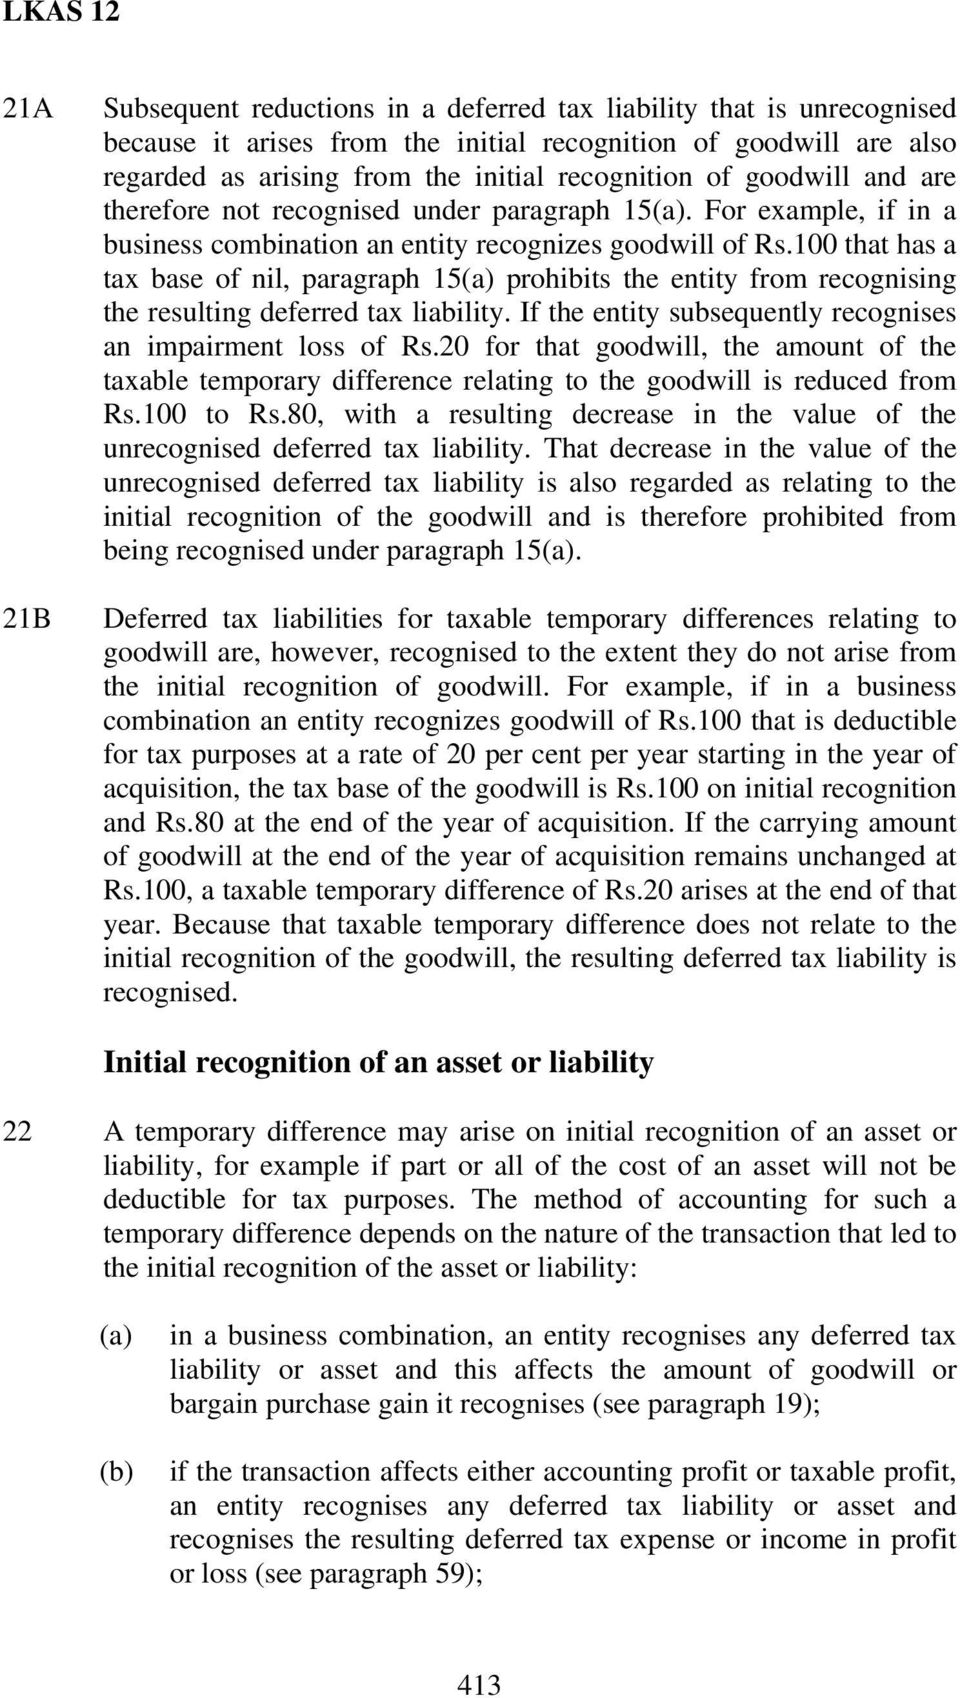 100 that has a tax base of nil, paragraph 15(a) prohibits the entity from recognising the resulting deferred tax liability. If the entity subsequently recognises an impairment loss of Rs.